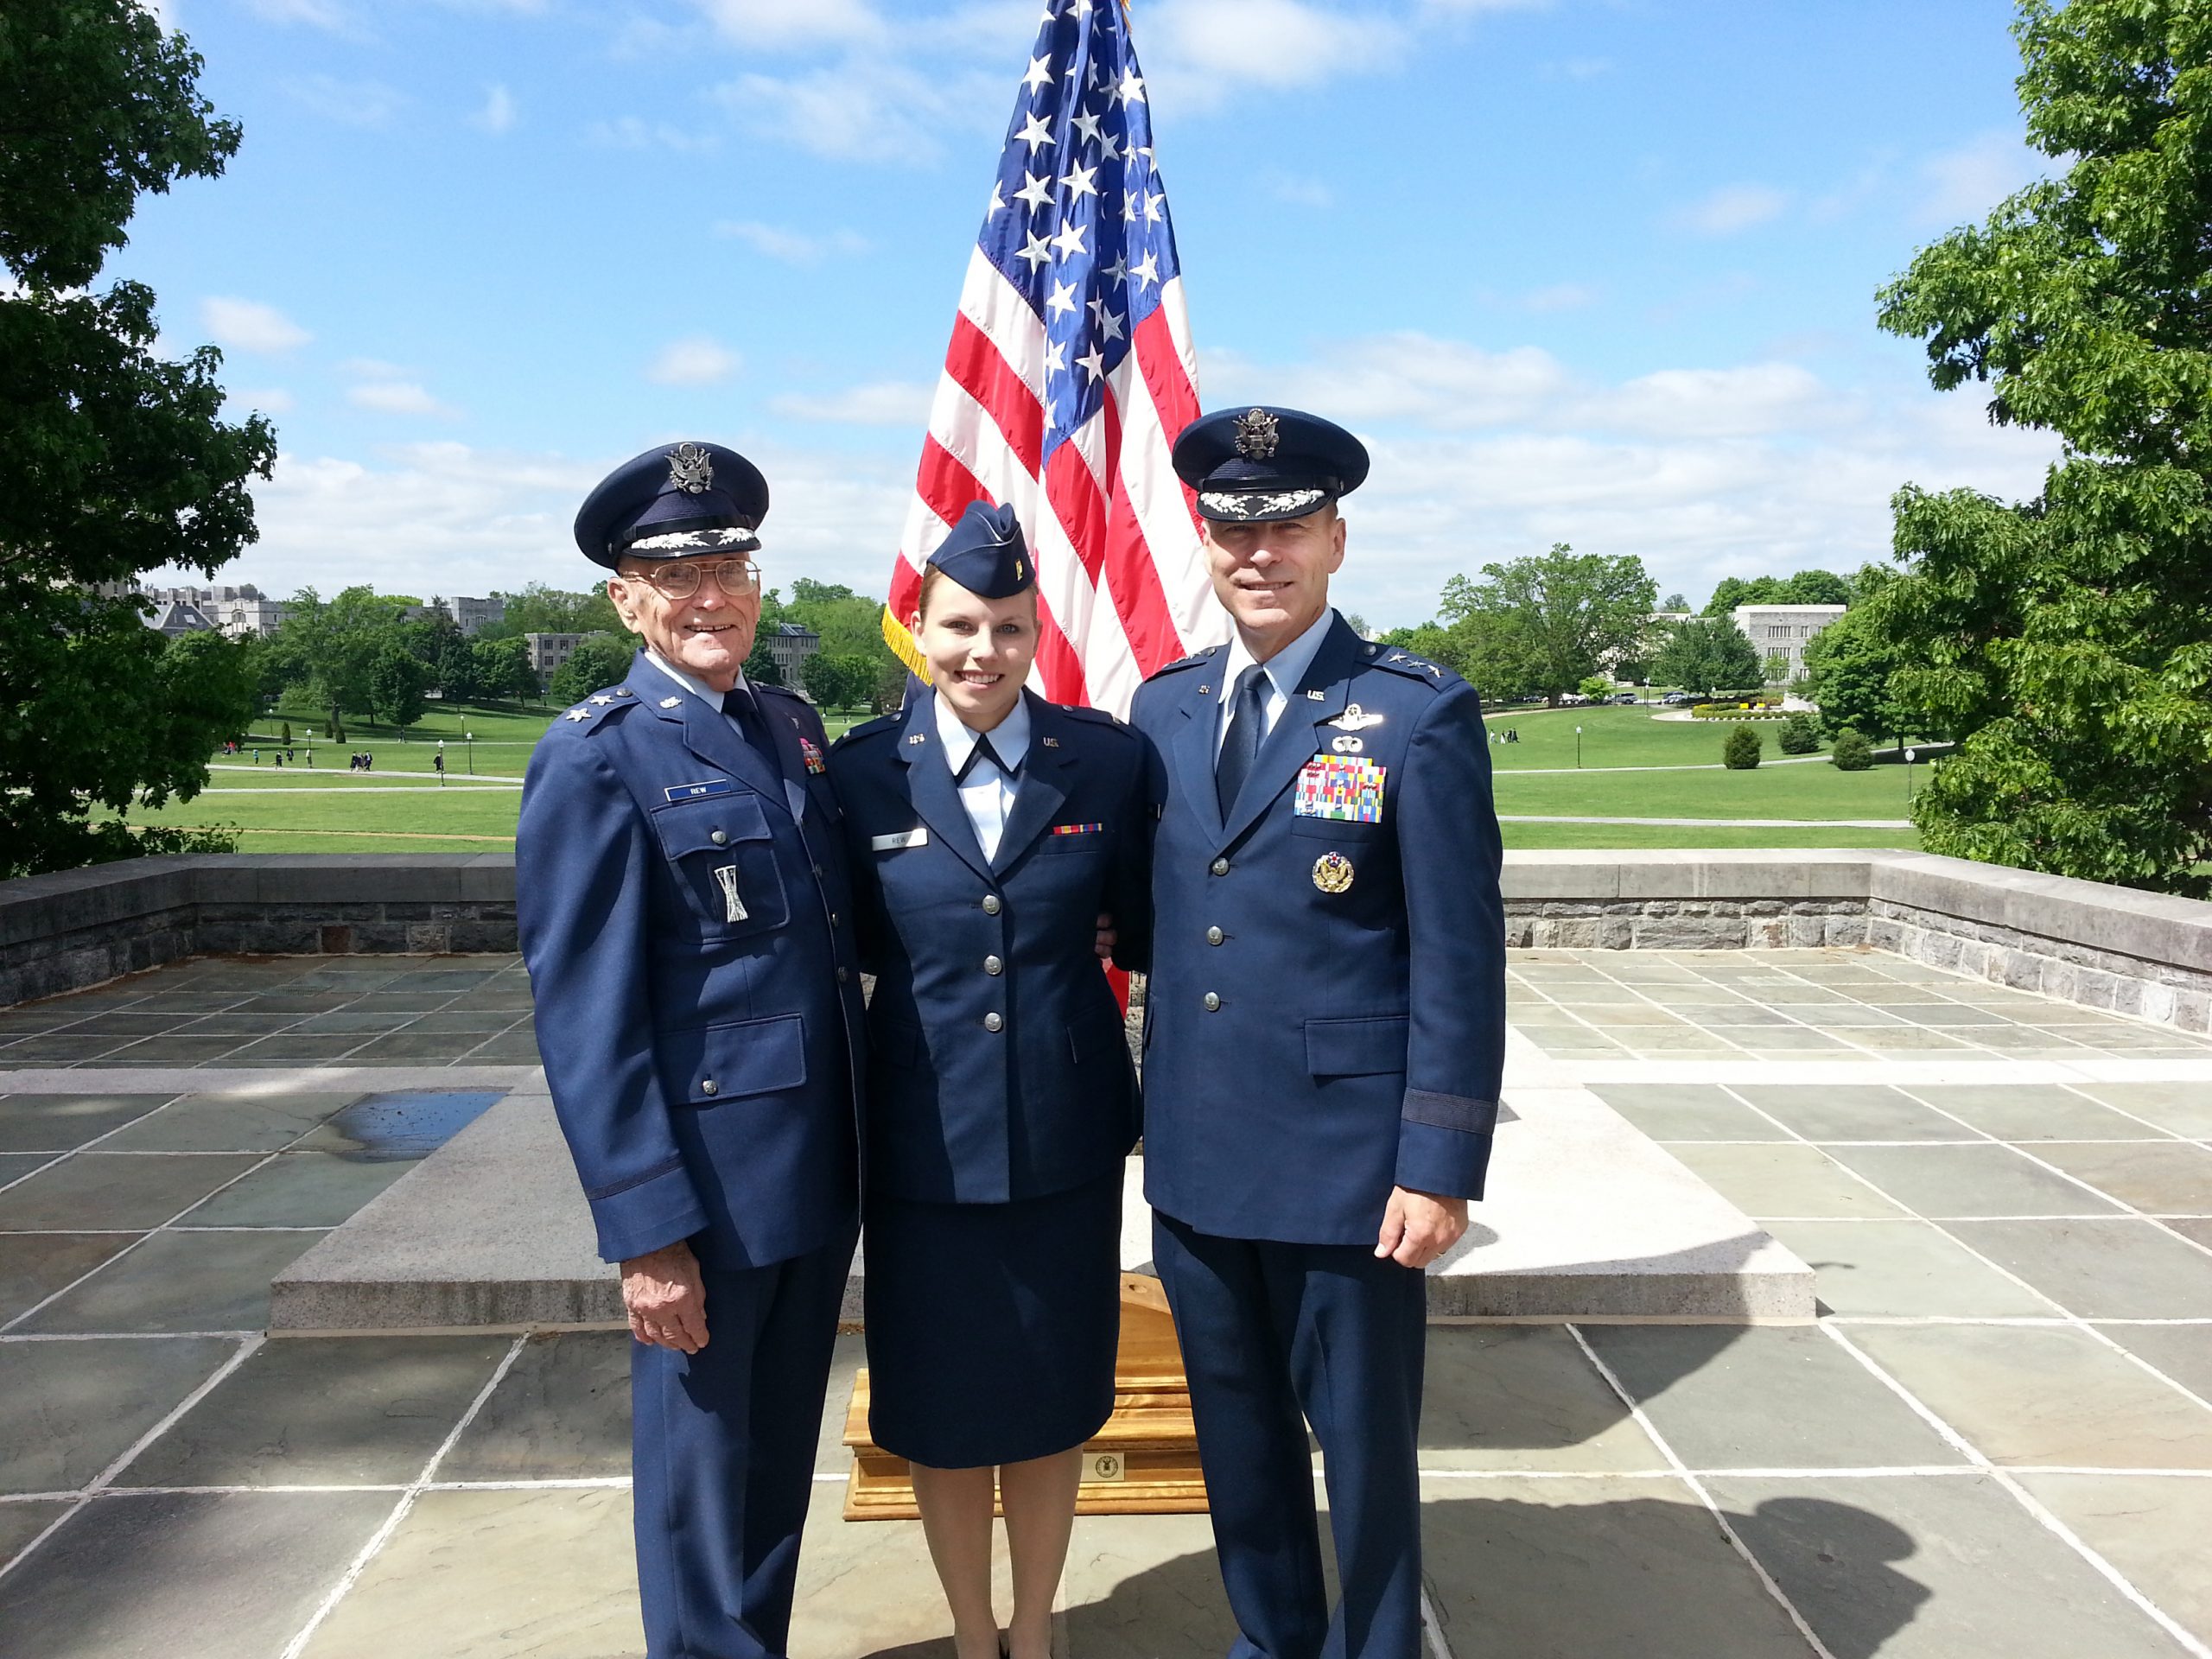 Maj. Gen. (retired) Rew after commissioning his granddaughter, Second Lt. Kathryn Rew, in the U.S. Air Force in 2014 at Virginia Tech University. She is the daughter of Lt. Gen. (retired) Bill Rew.